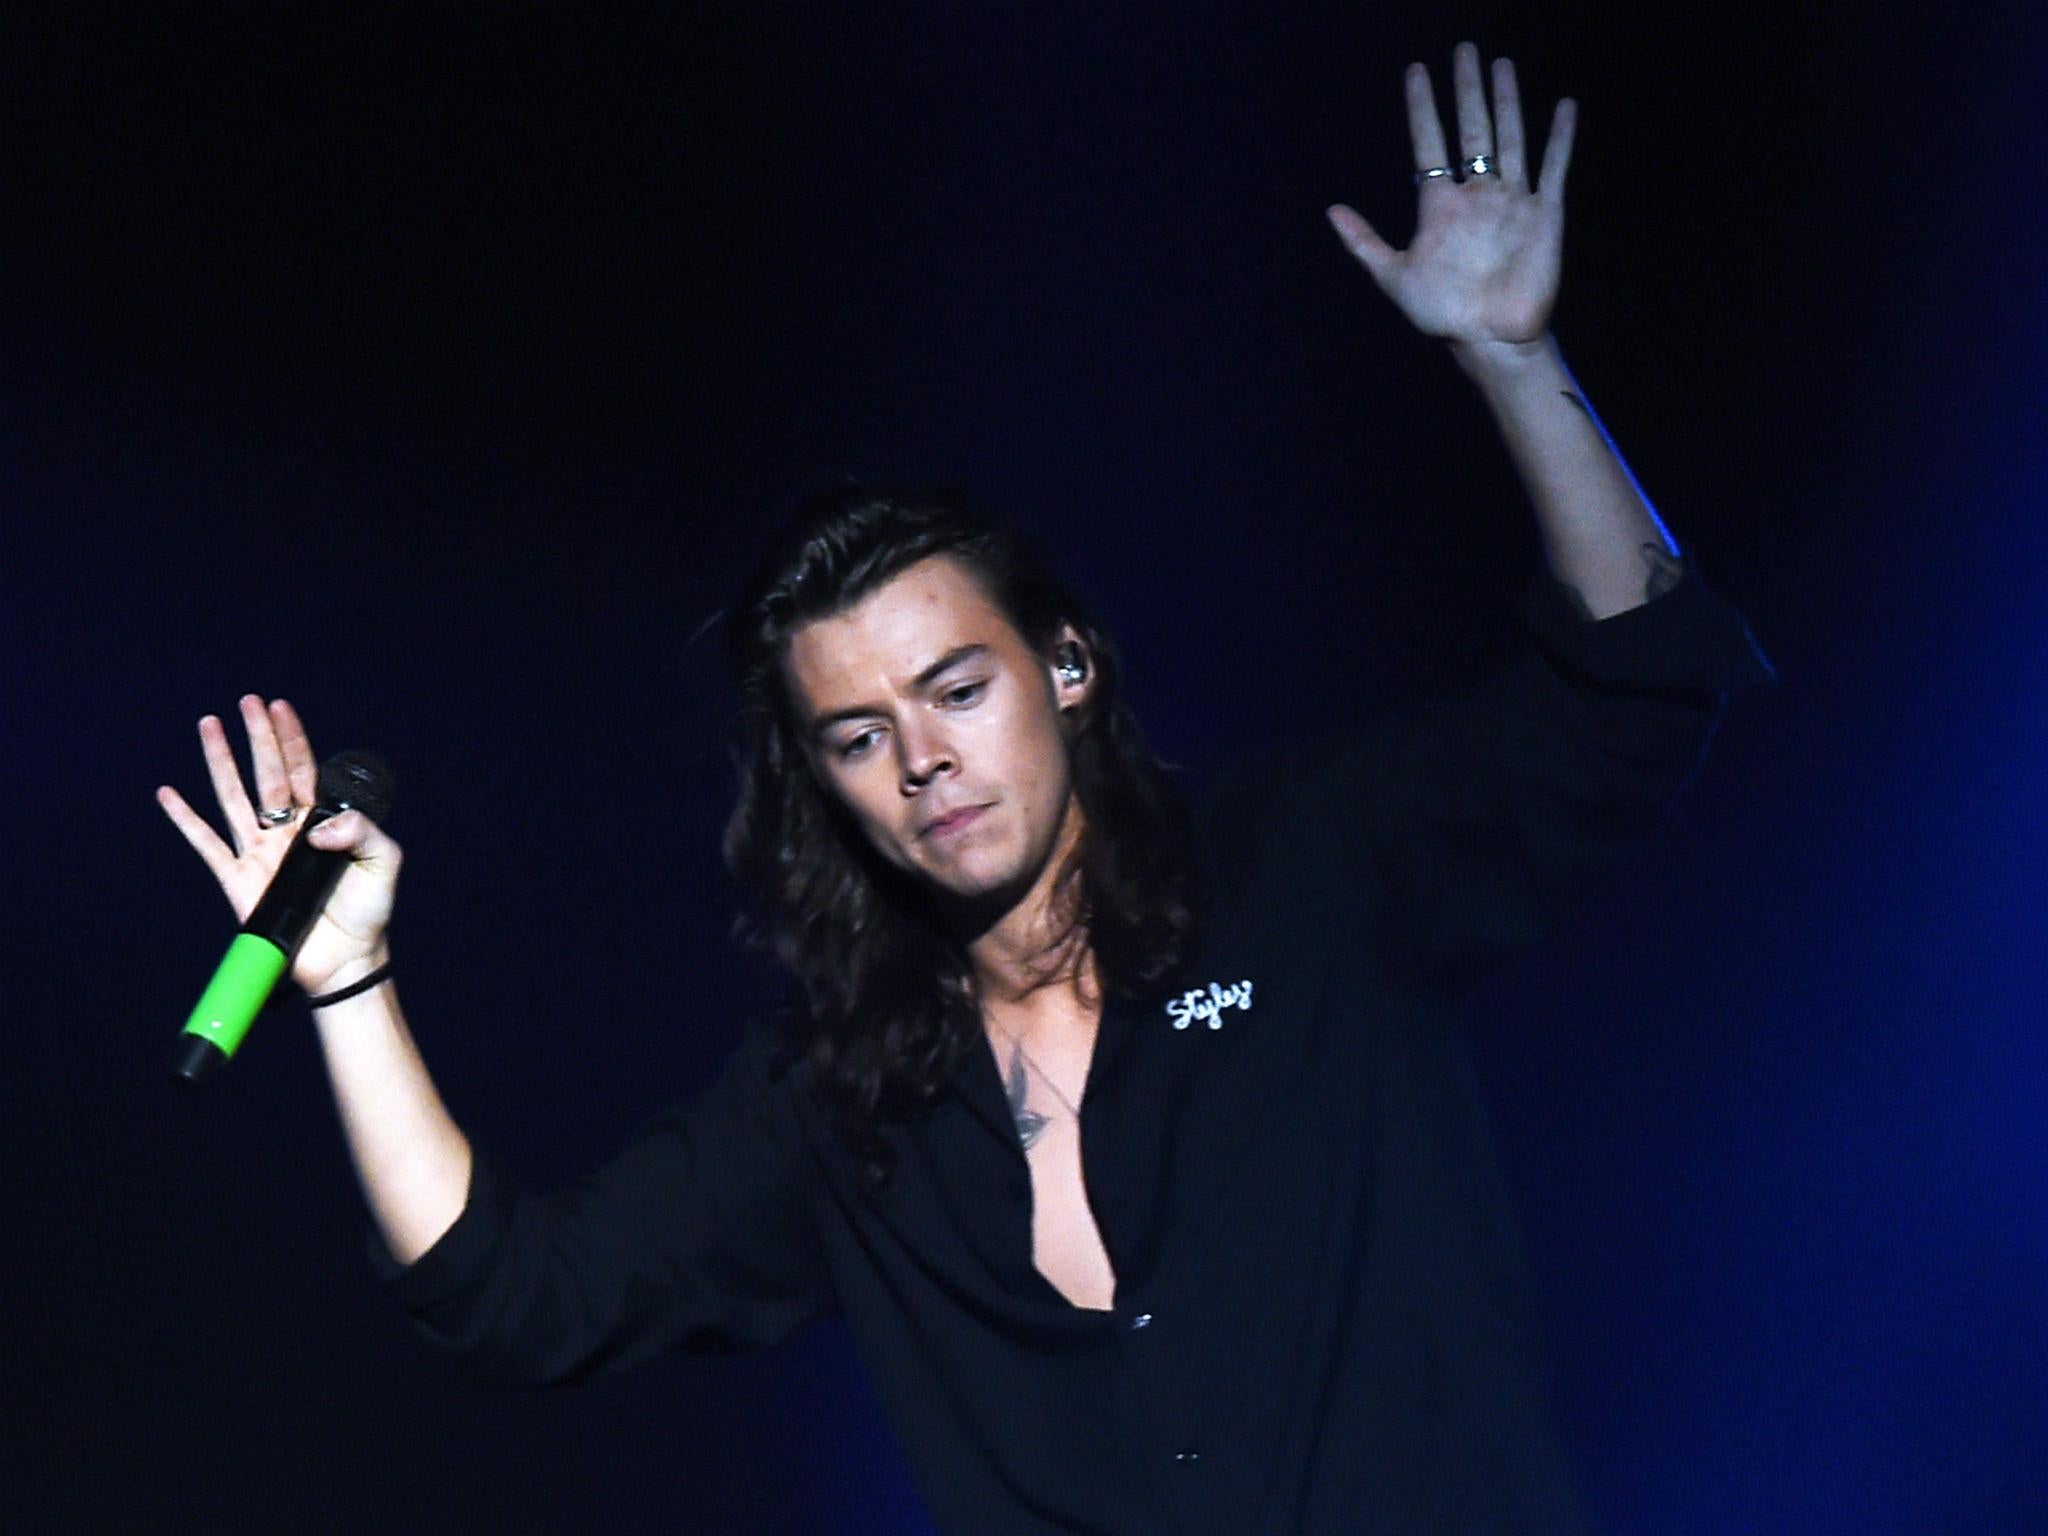 Harry Styles of One Direction has been writing songs with Snow Patrol's Johnny McDaid